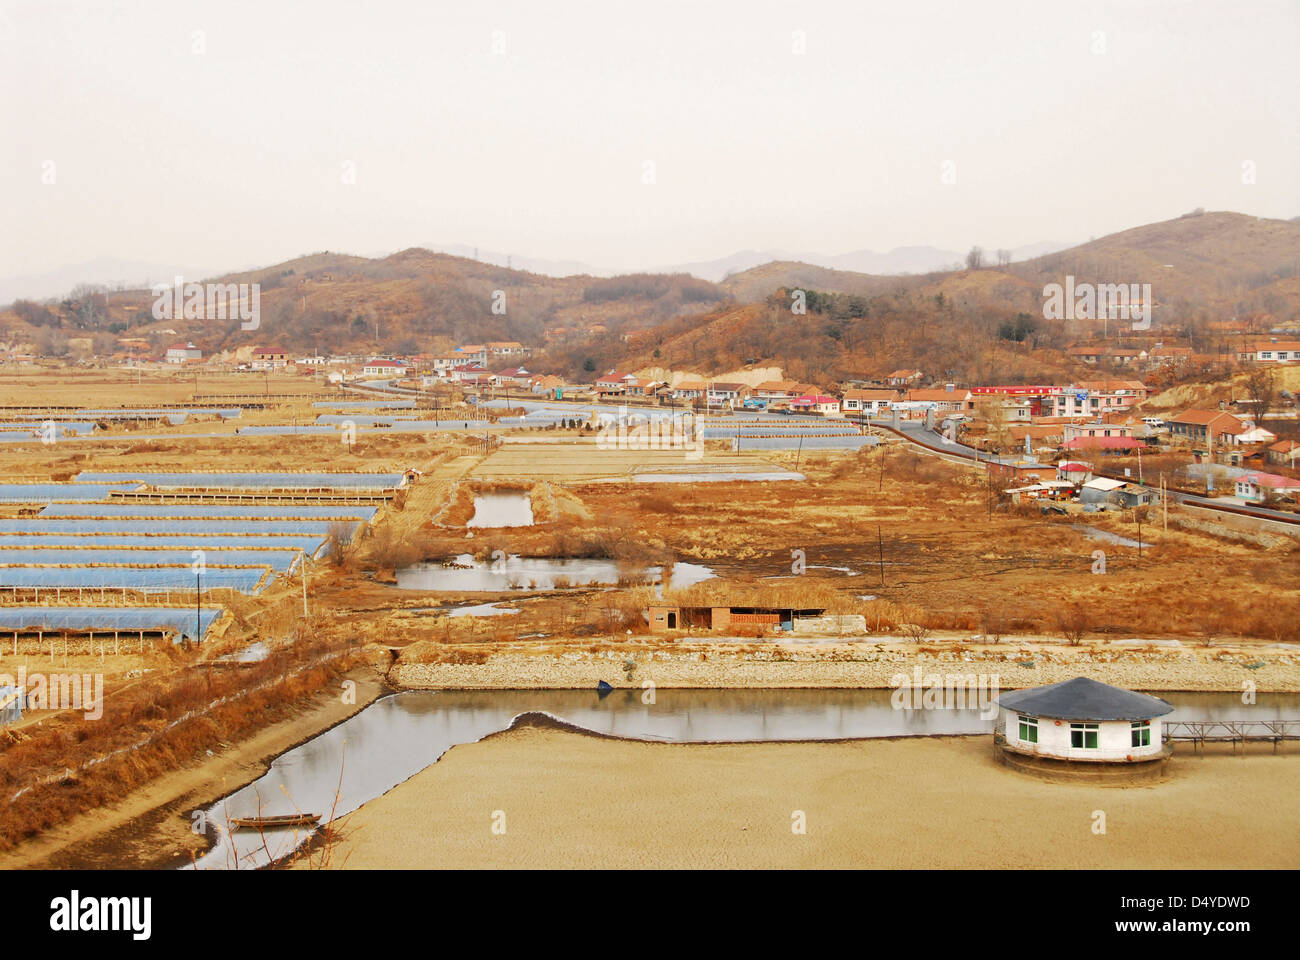 China, Dandong, elevated view of a salt pond with human settlement and mountains in the background Stock Photo